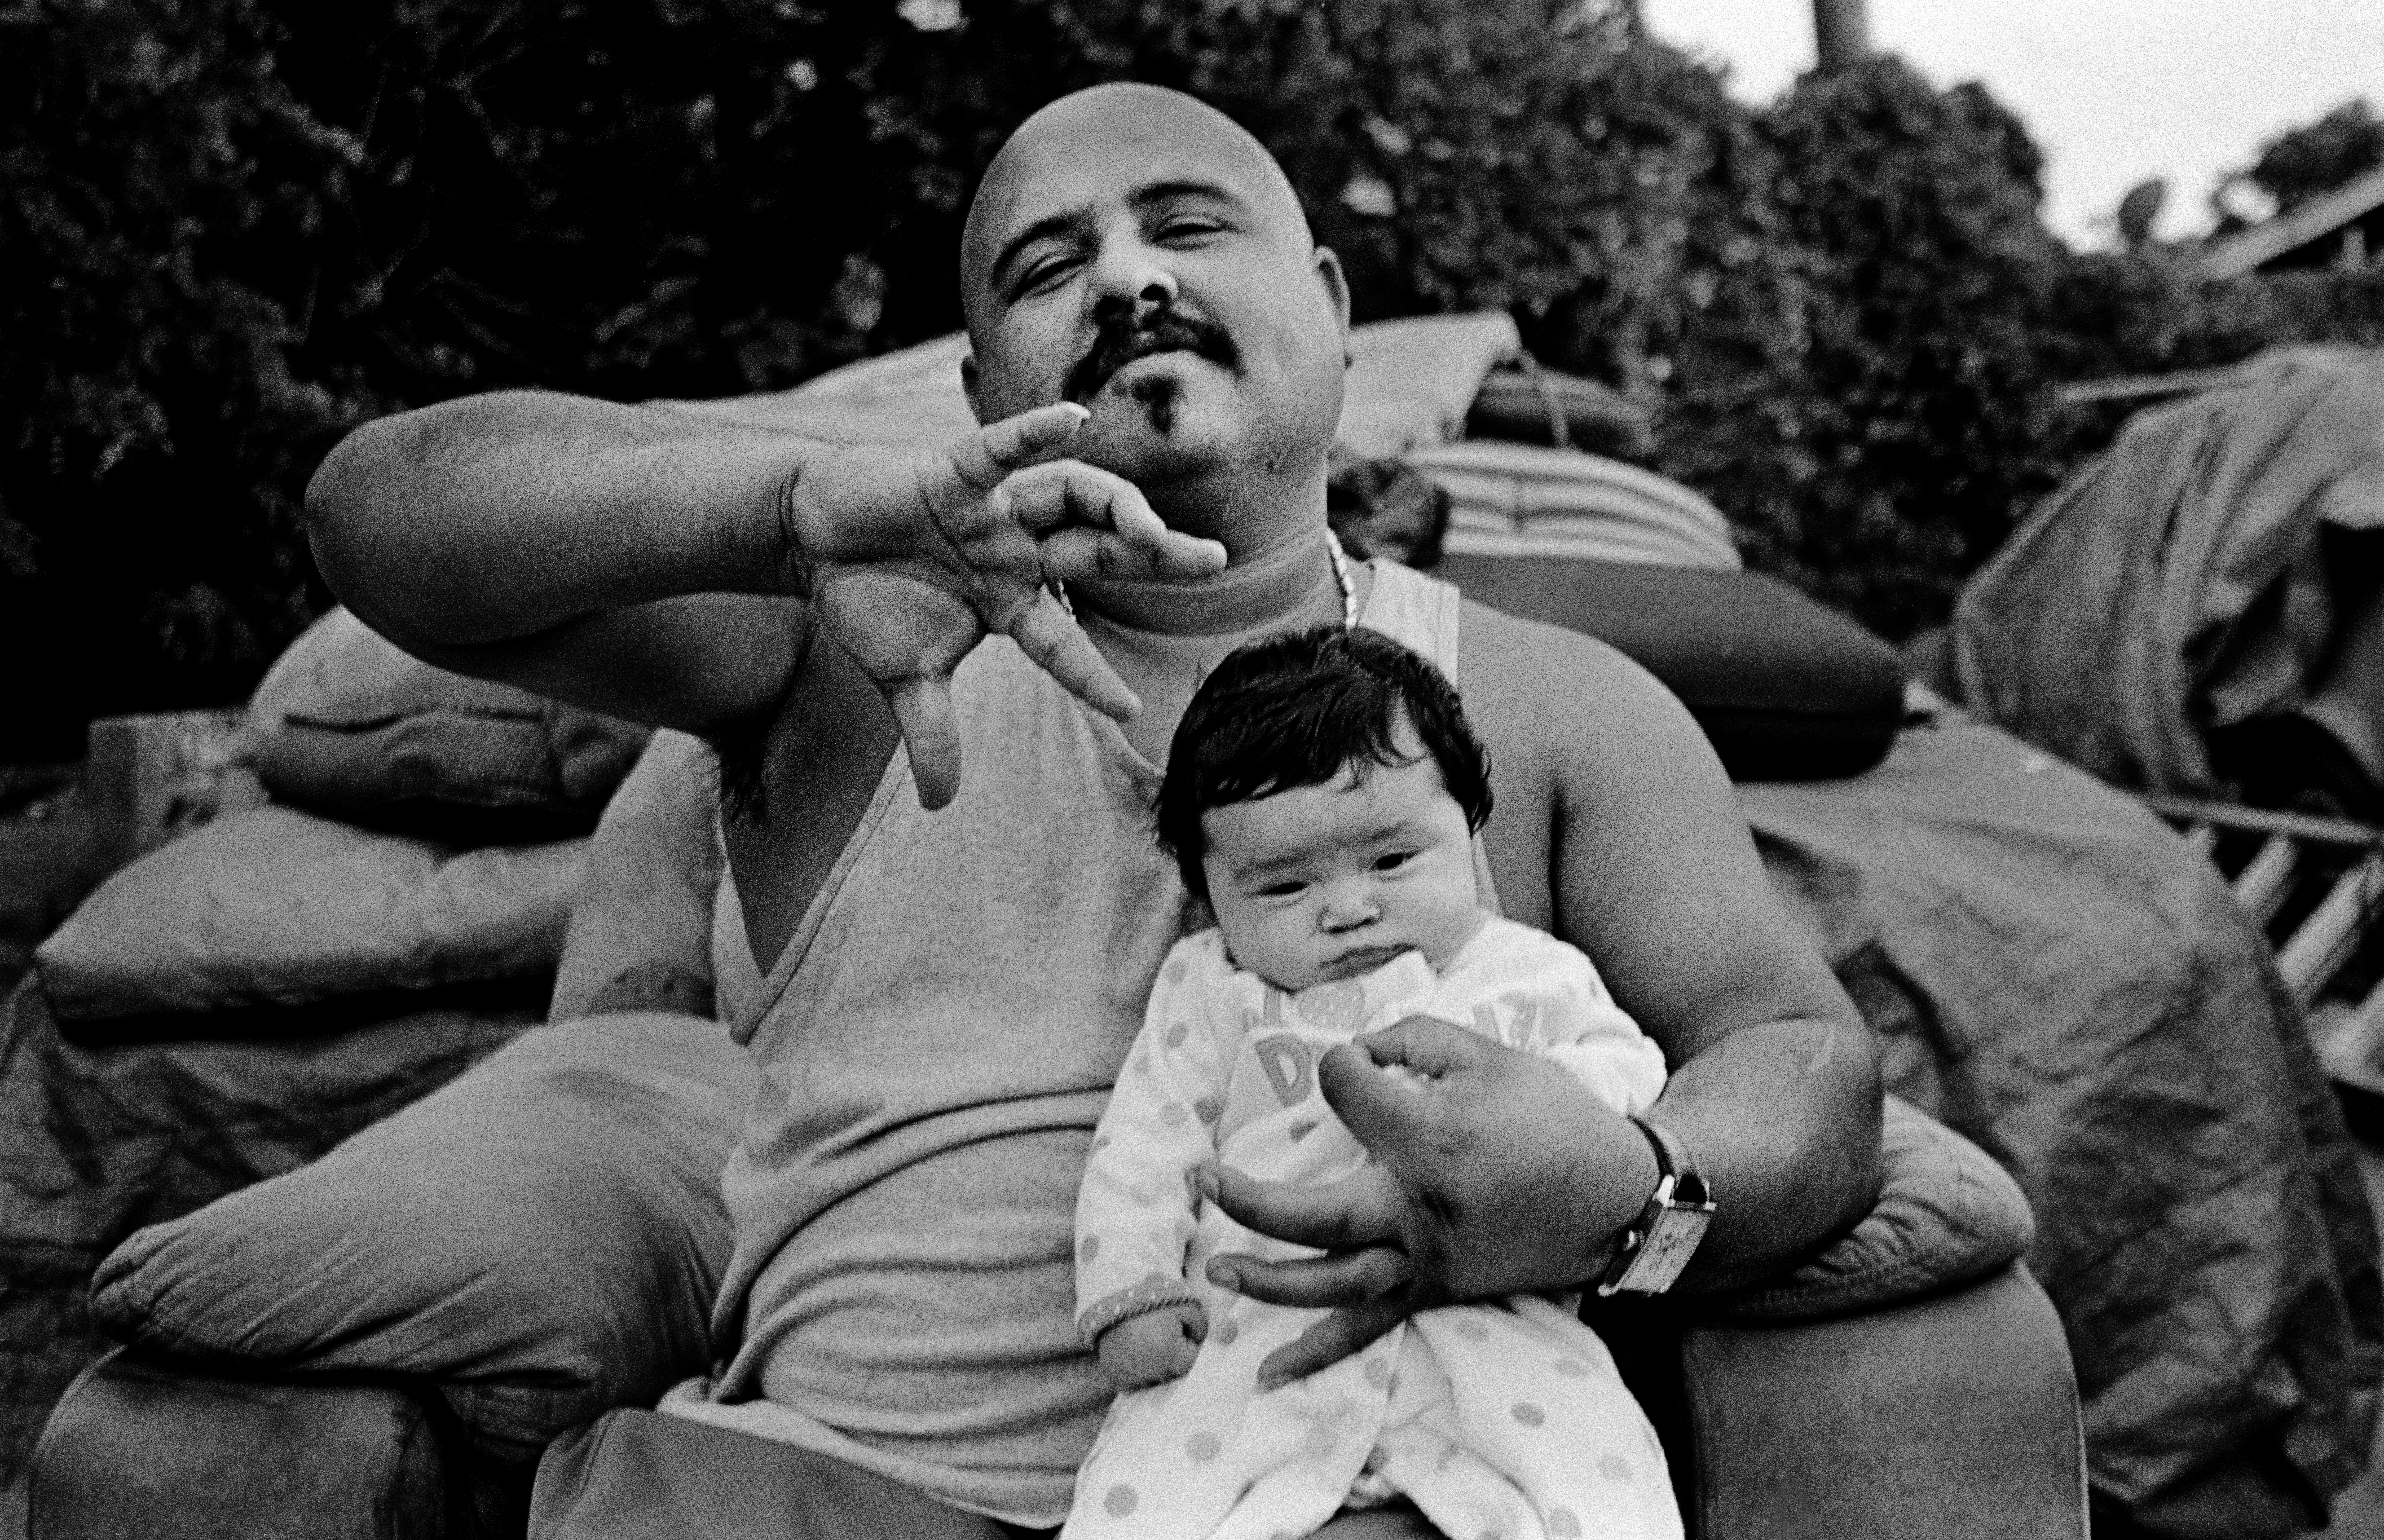 Igor showing gang signs while holding his daughter.